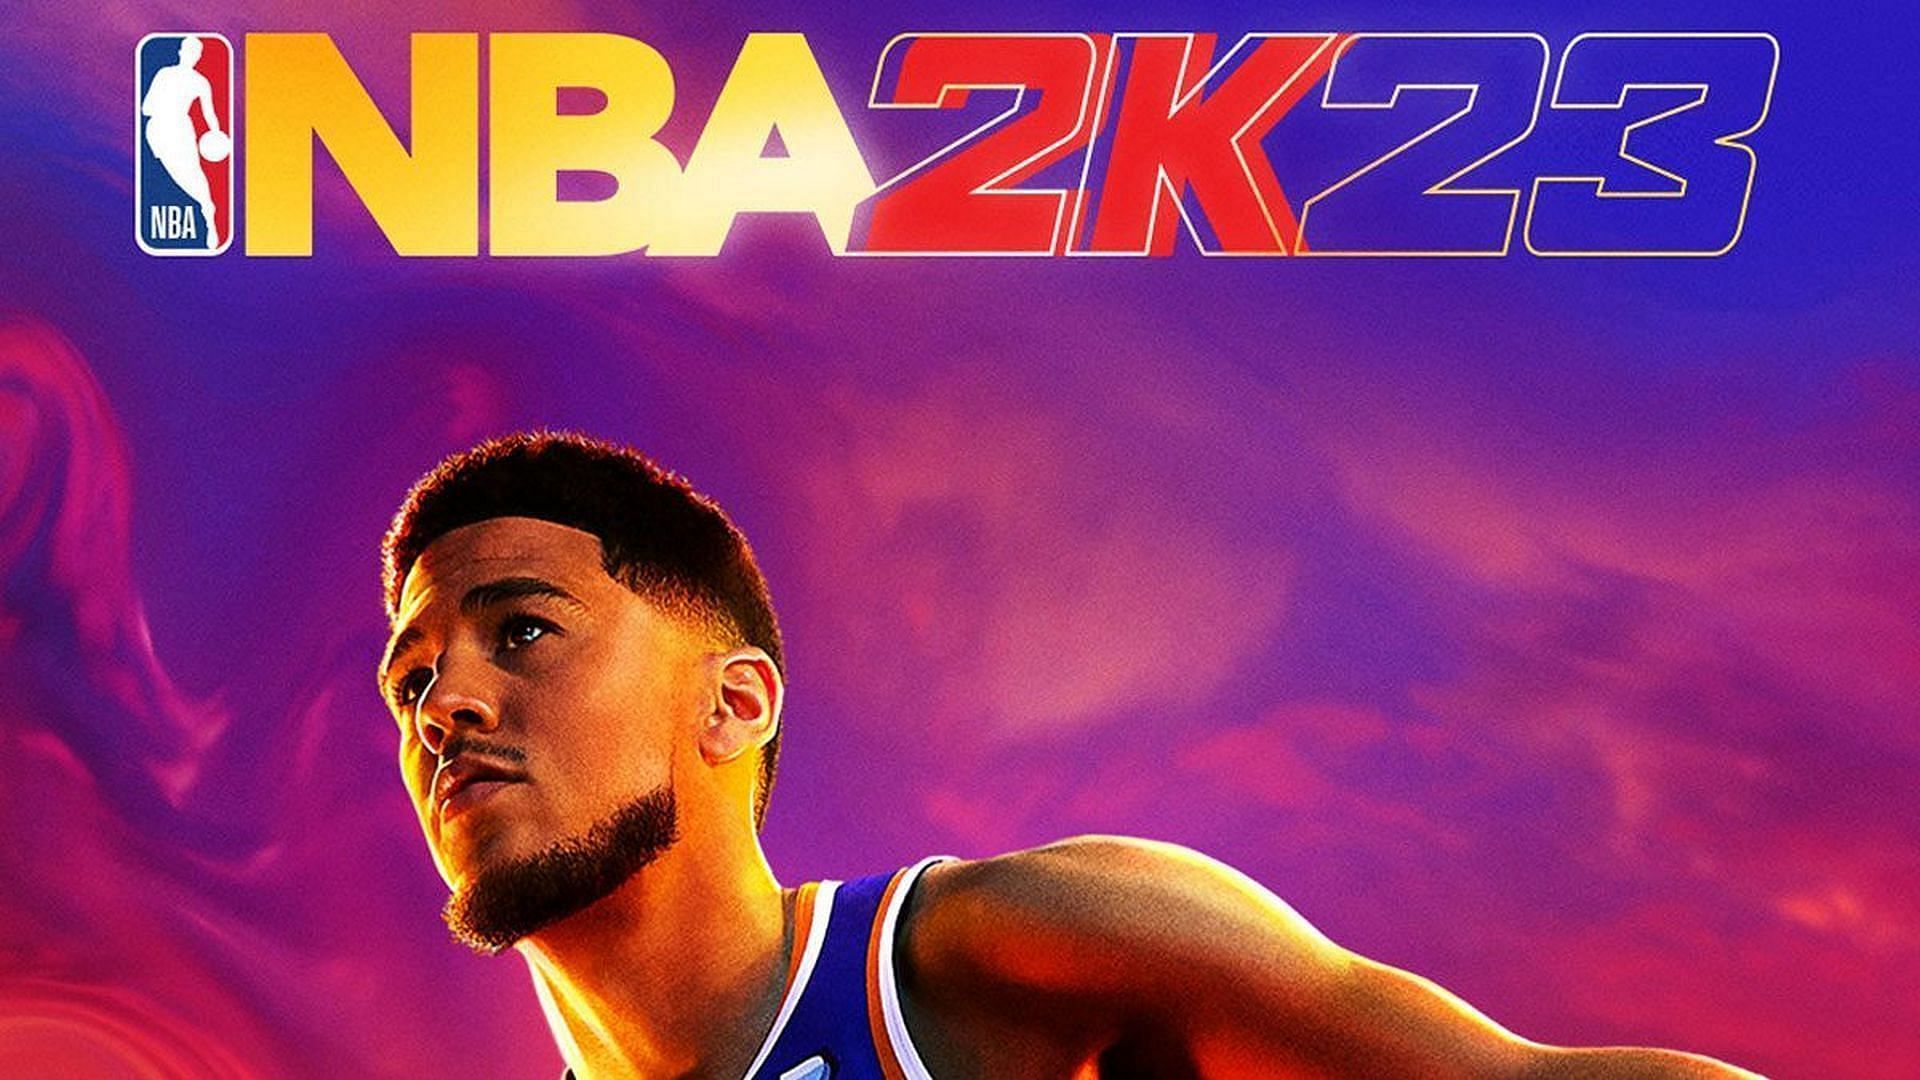 NBA 2K23 Download Size: Current and Next Gen